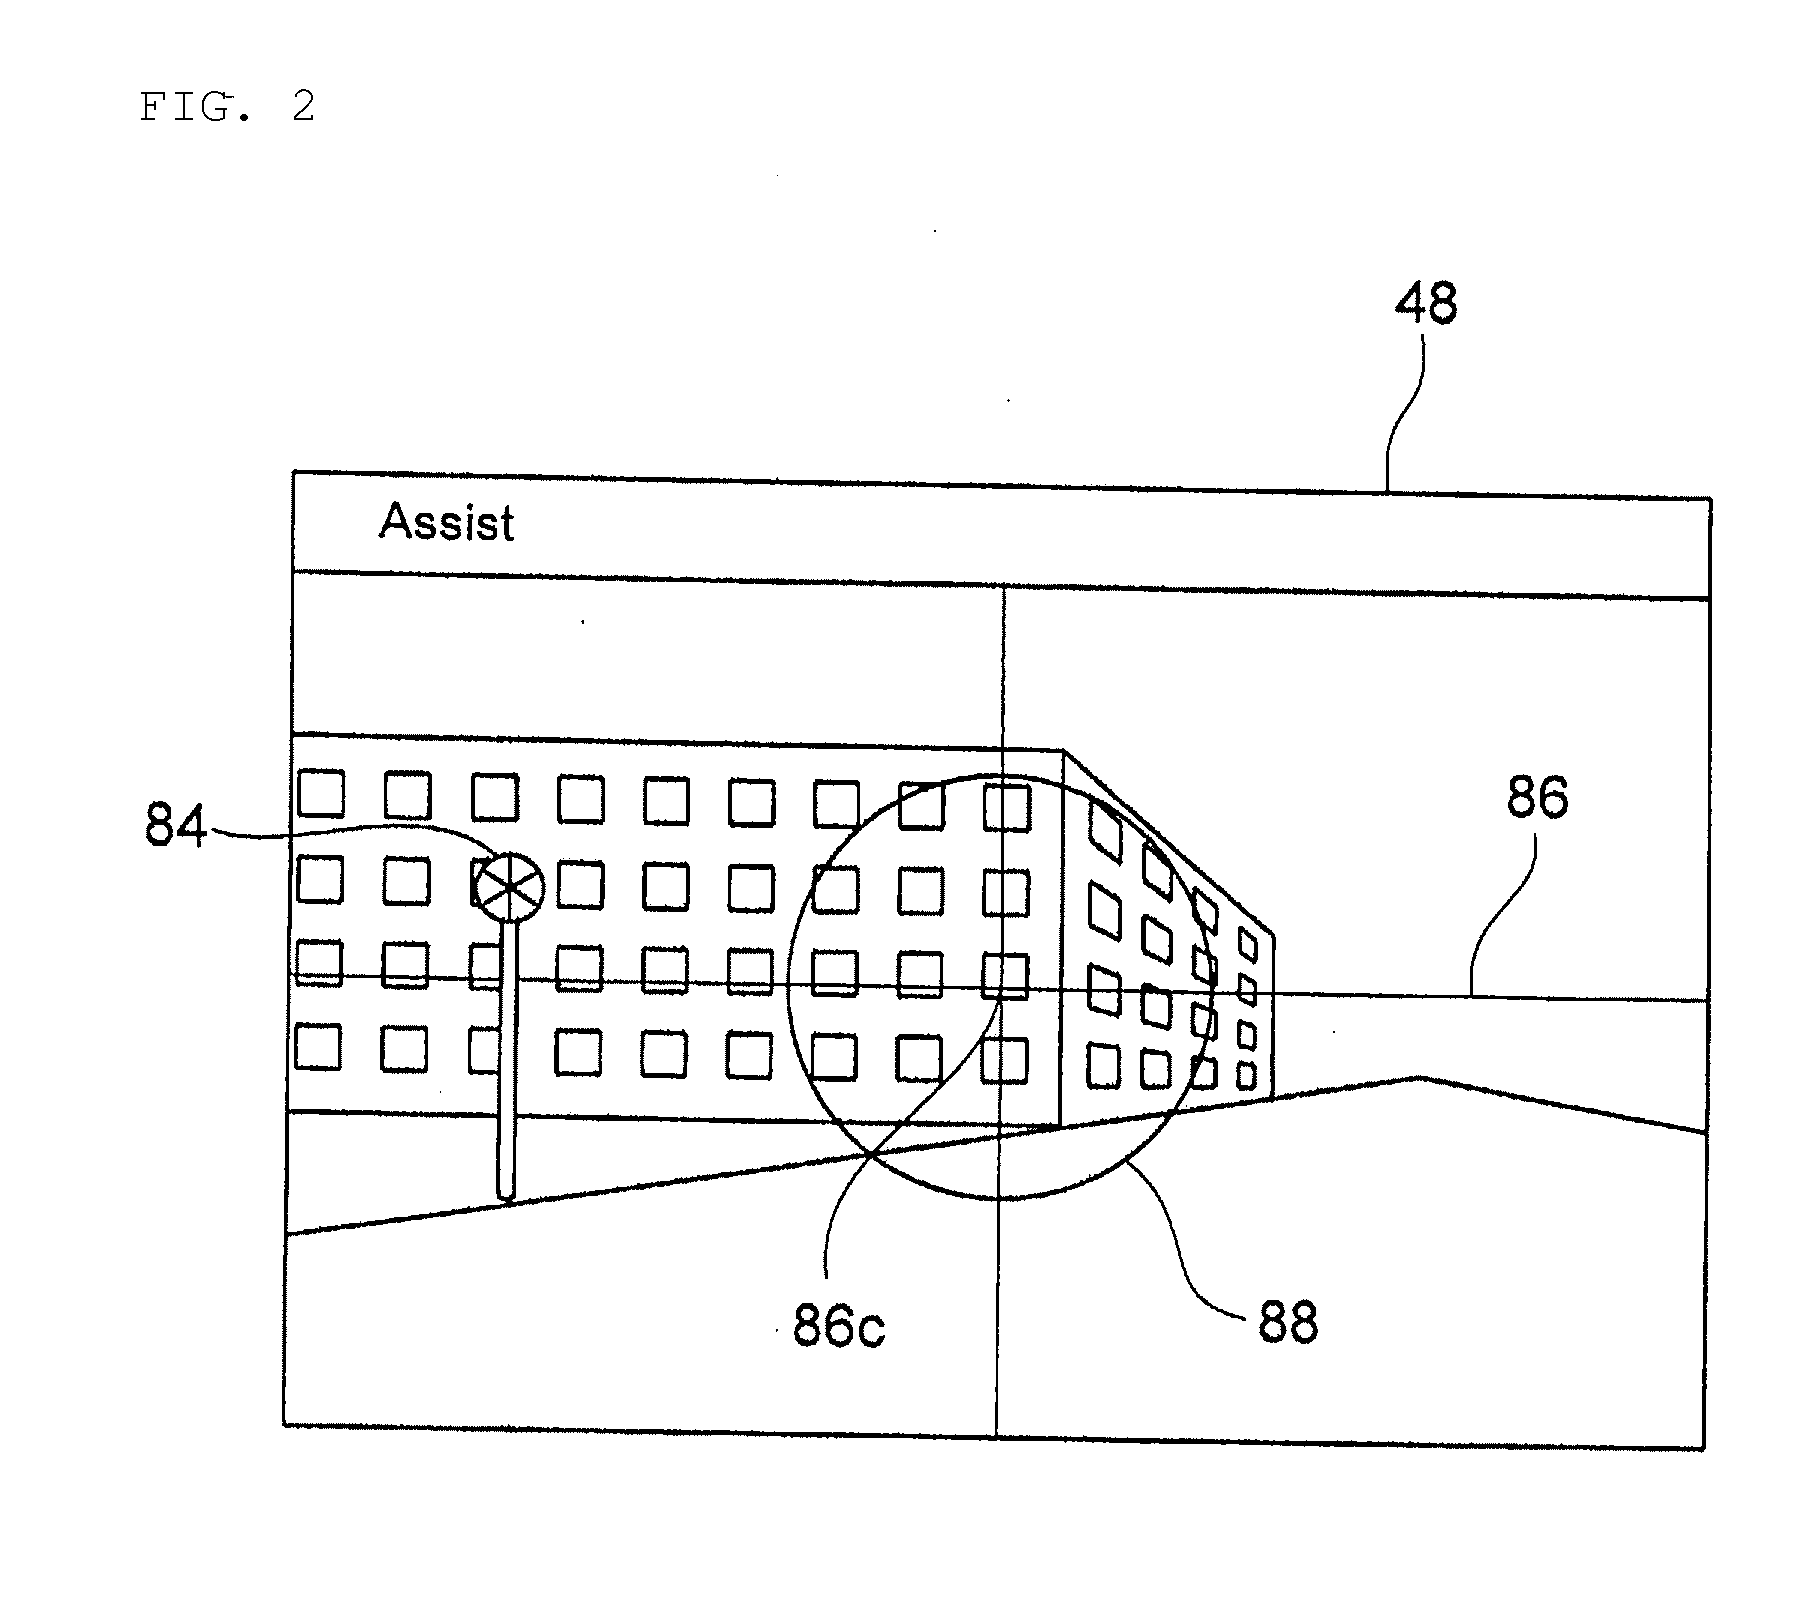 Manual surveying instrument having collimation assisting device